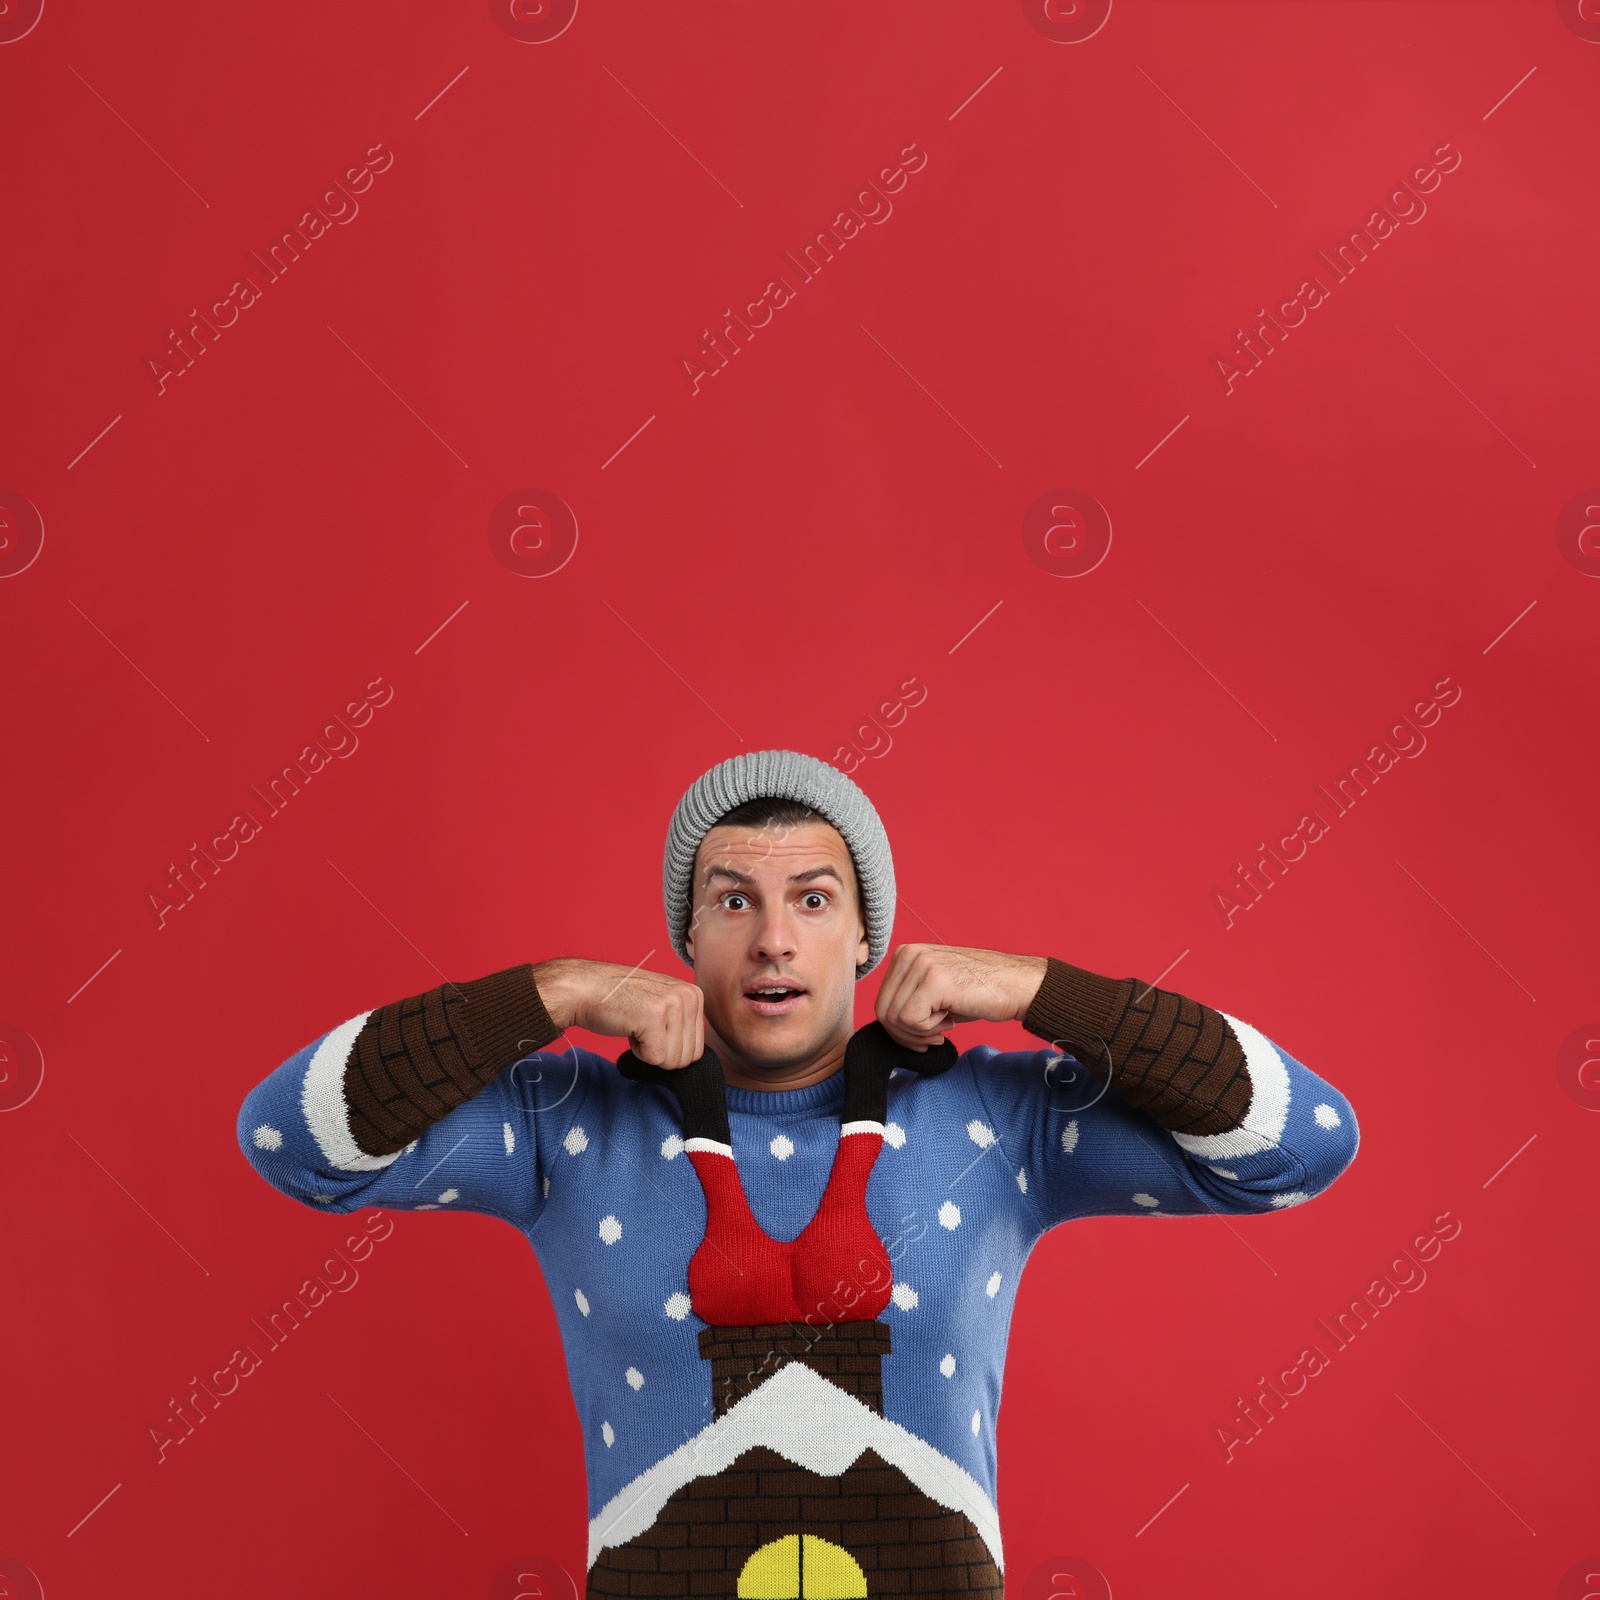 Photo of Surprised man in hat pulling decorative Santa on his Christmas sweater against red background